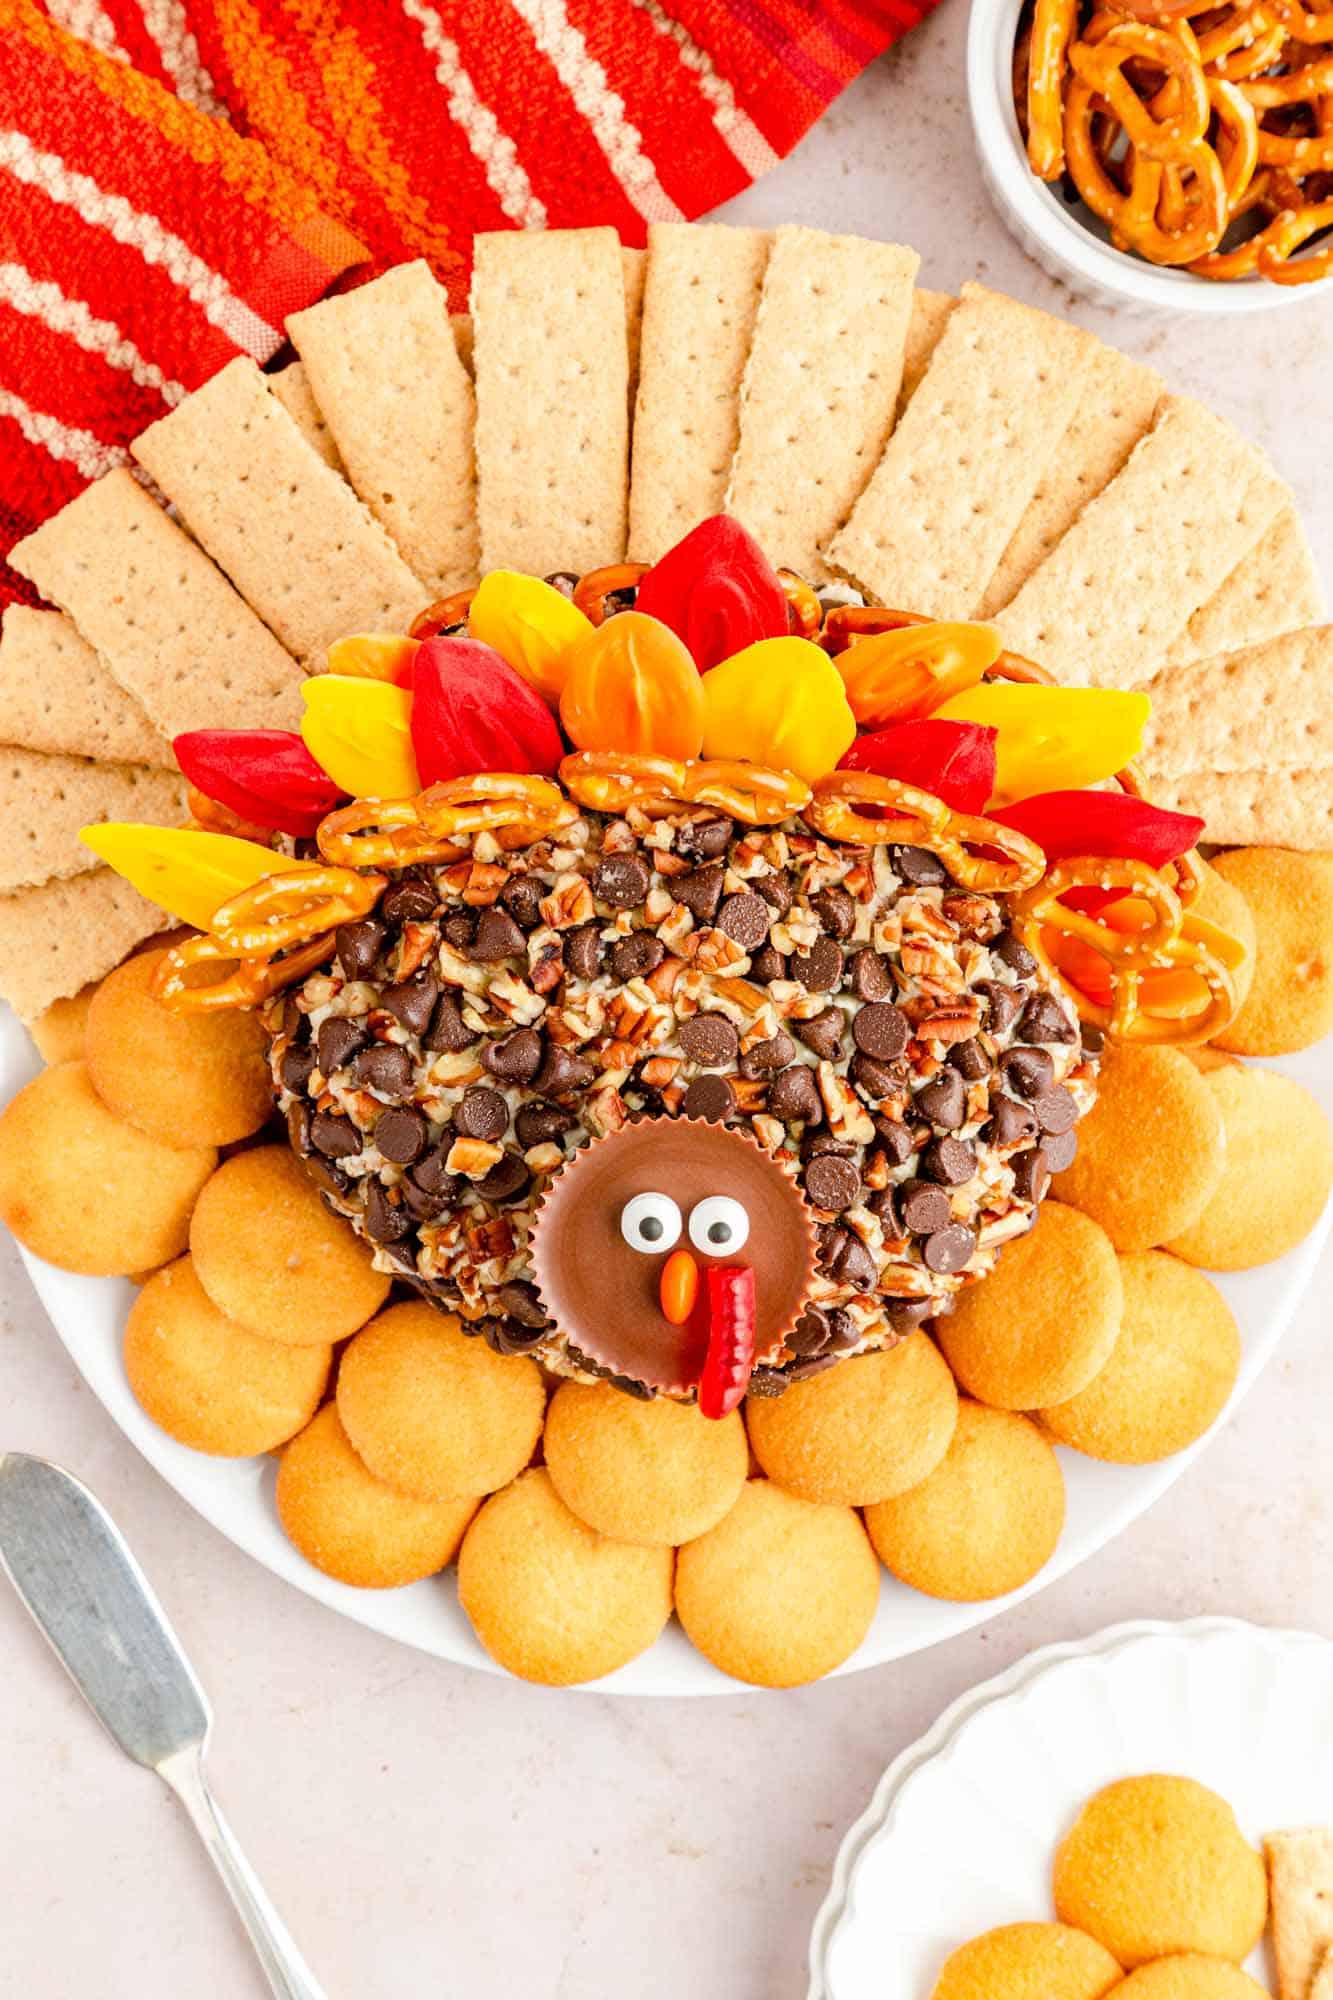 dessert turkey cheese ball viewed from above. It has a face made with a peanut butter cup, colorful candy feathers, and is surrounded by nilla wafers and graham crackers.